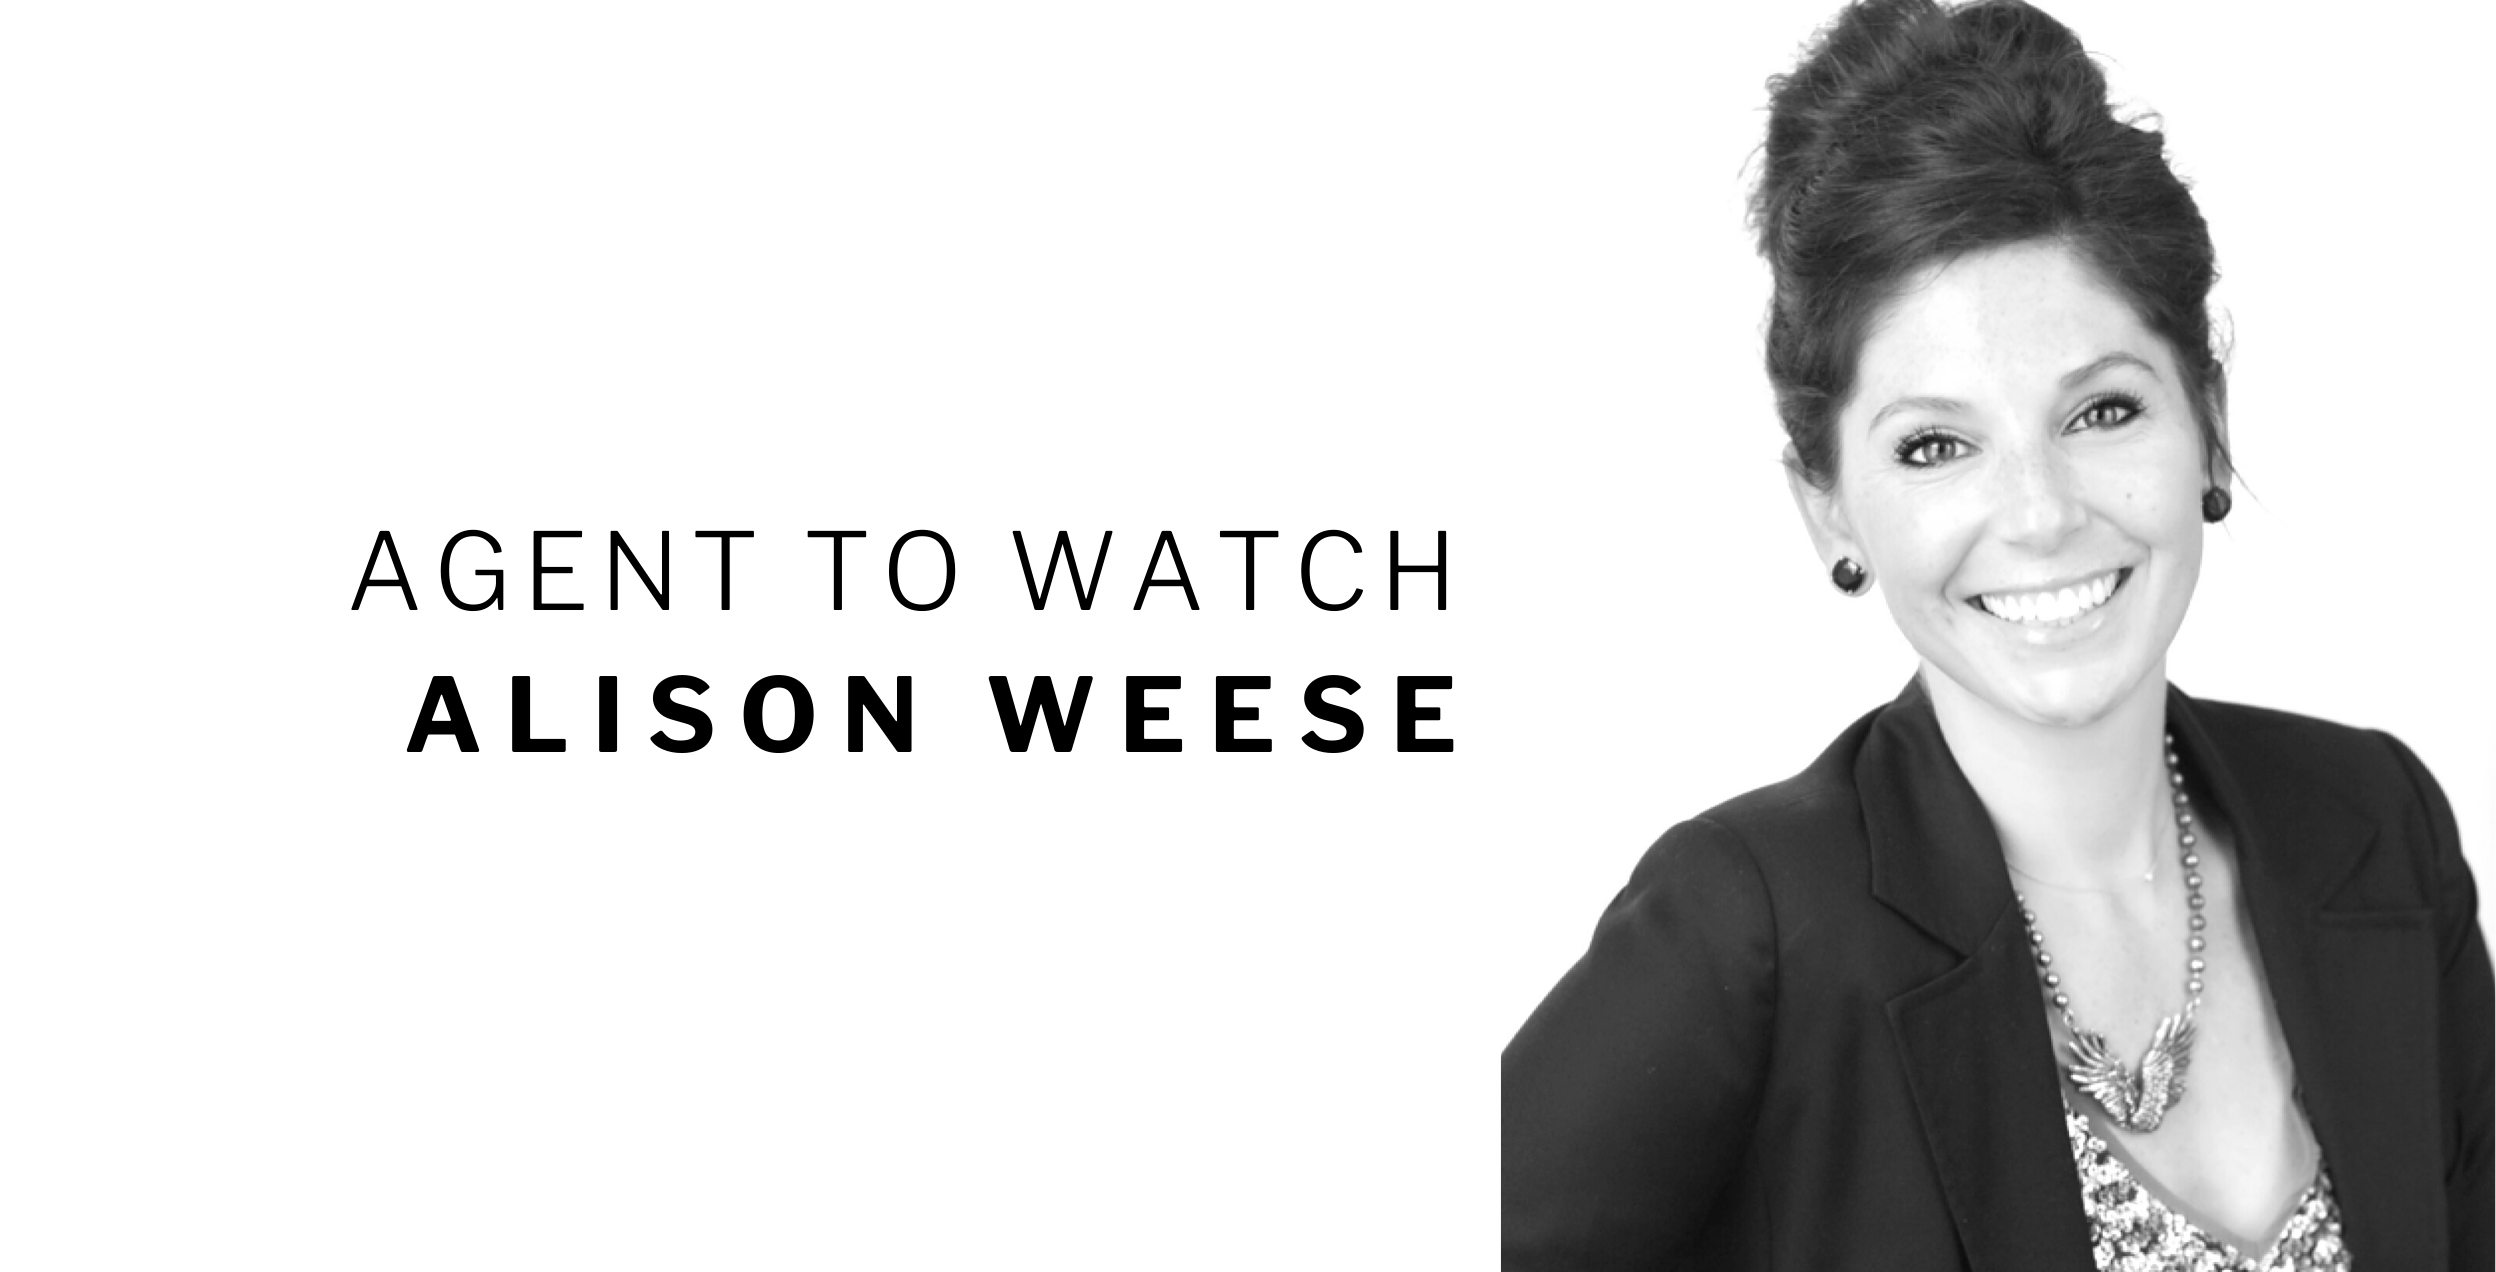 Agent to Watch Alison Weese